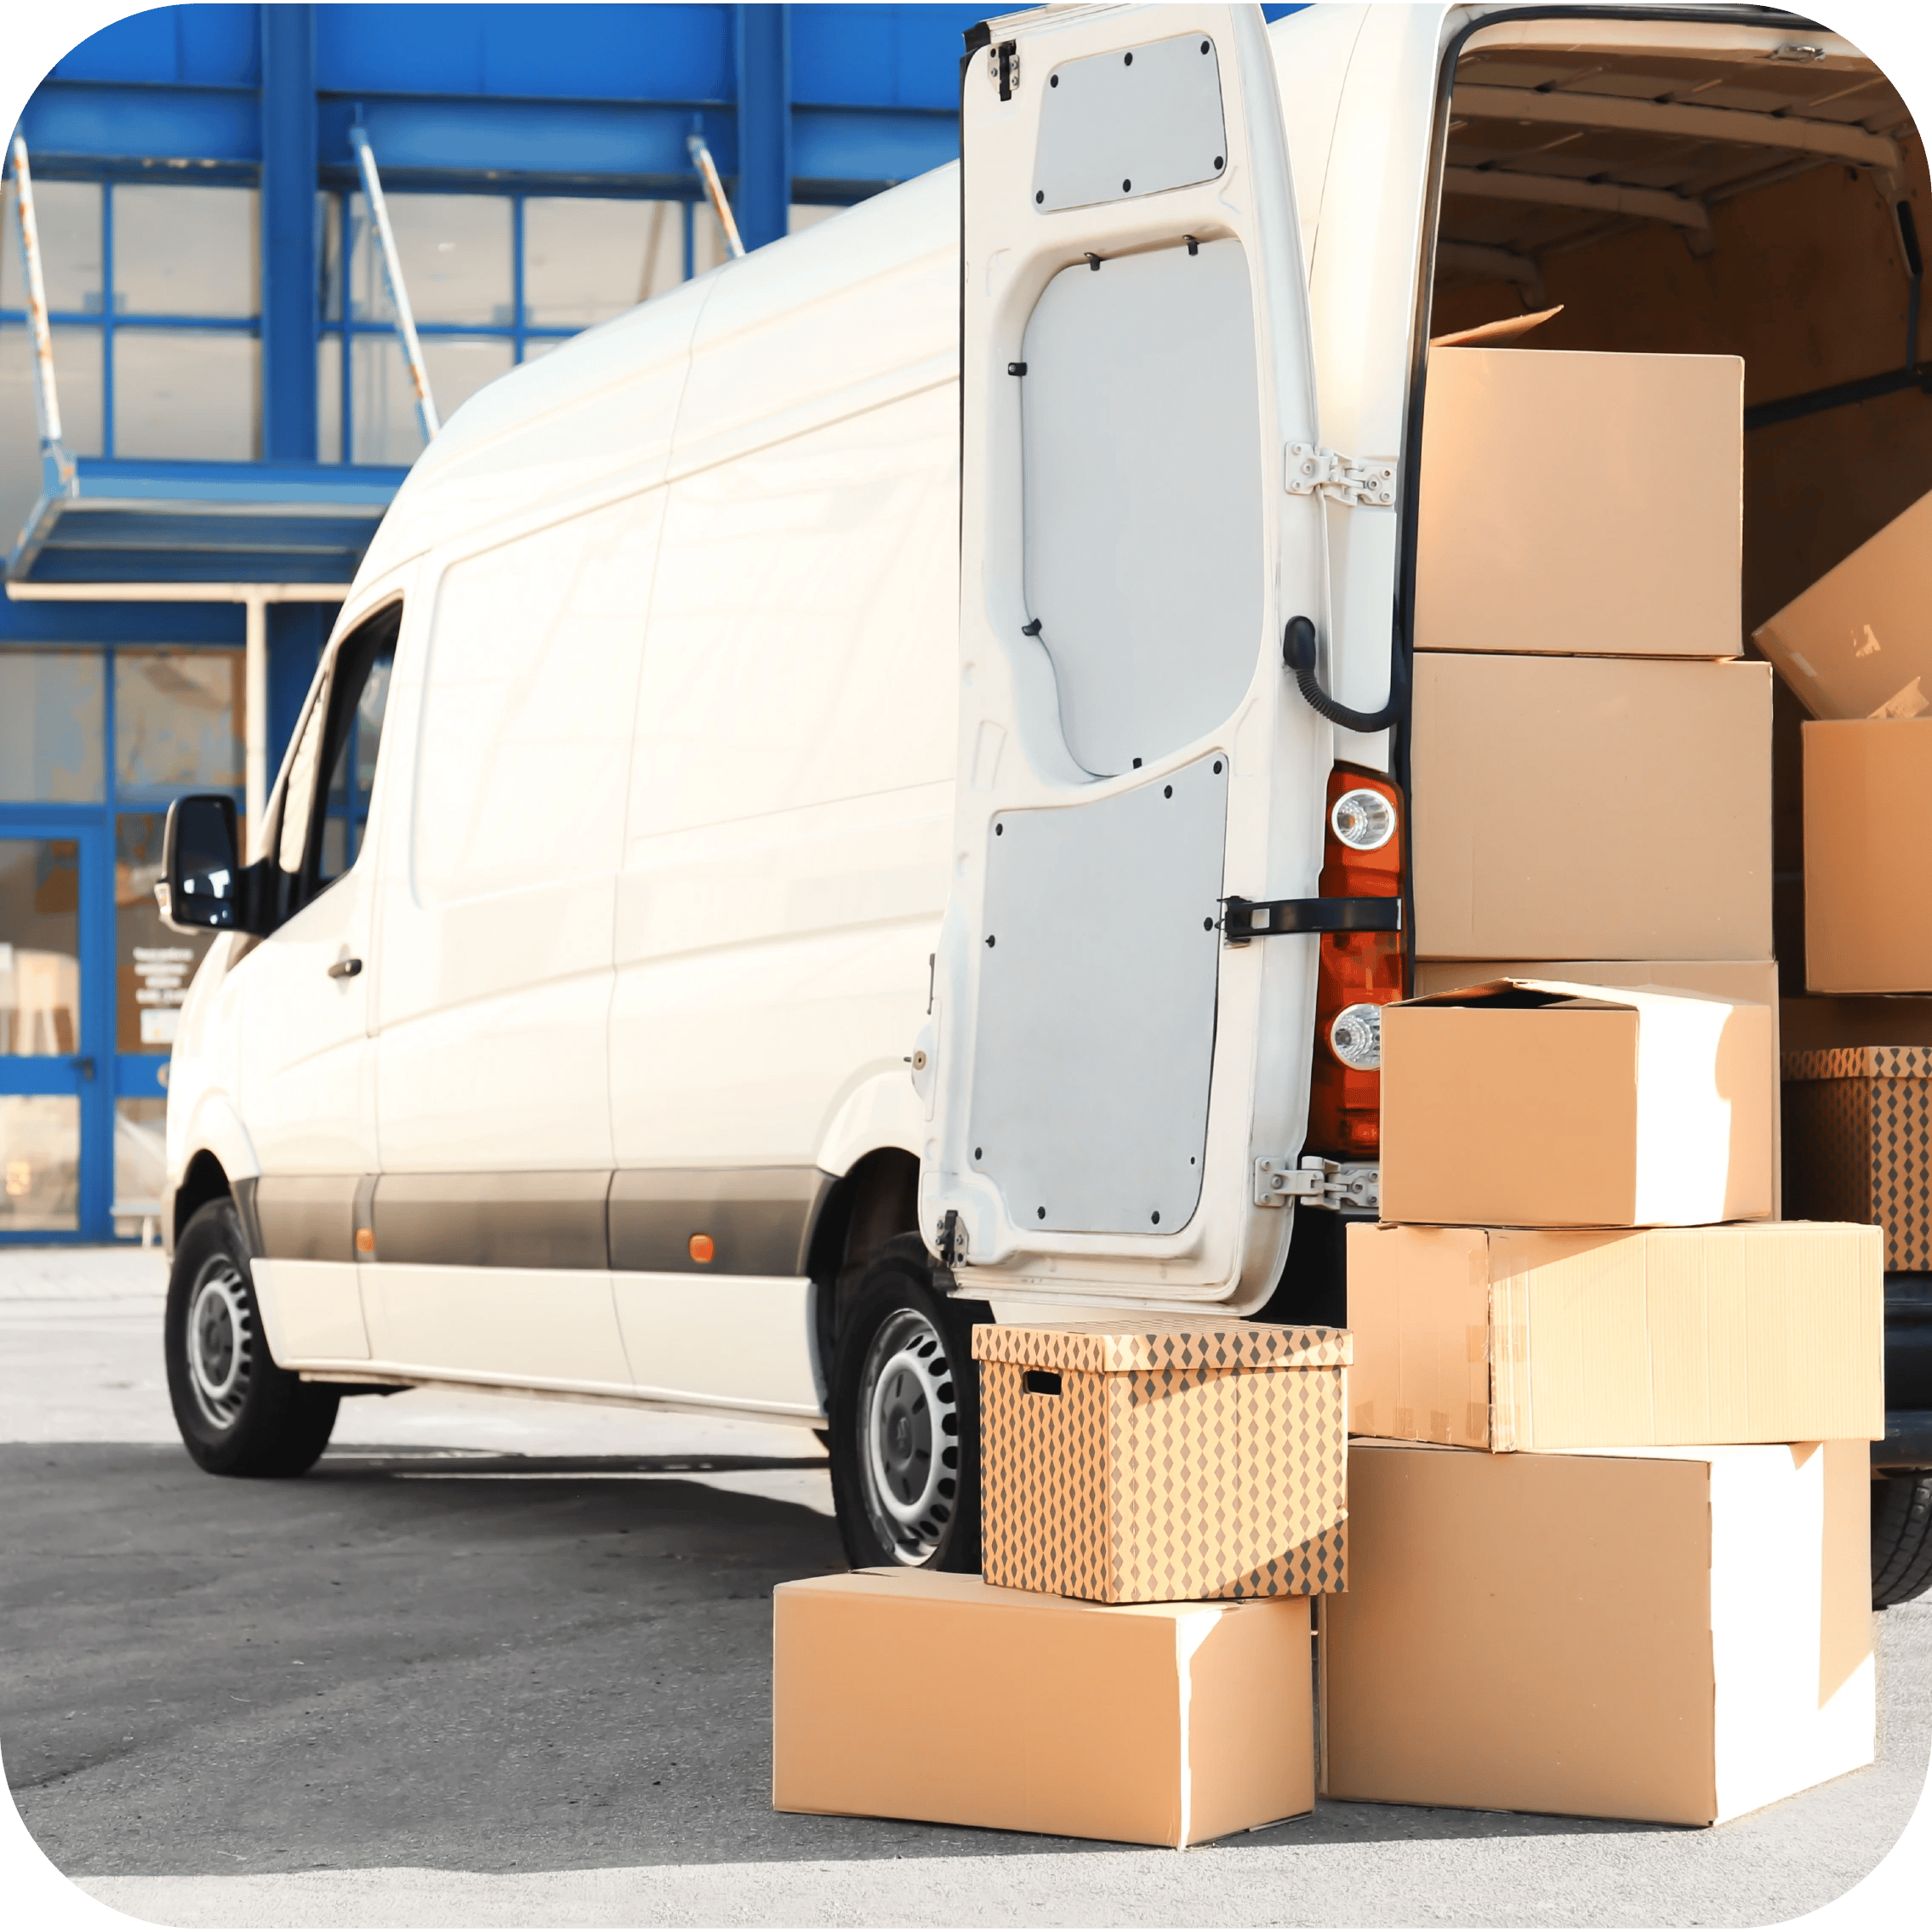 What impact does asset tracking have on logistics companies